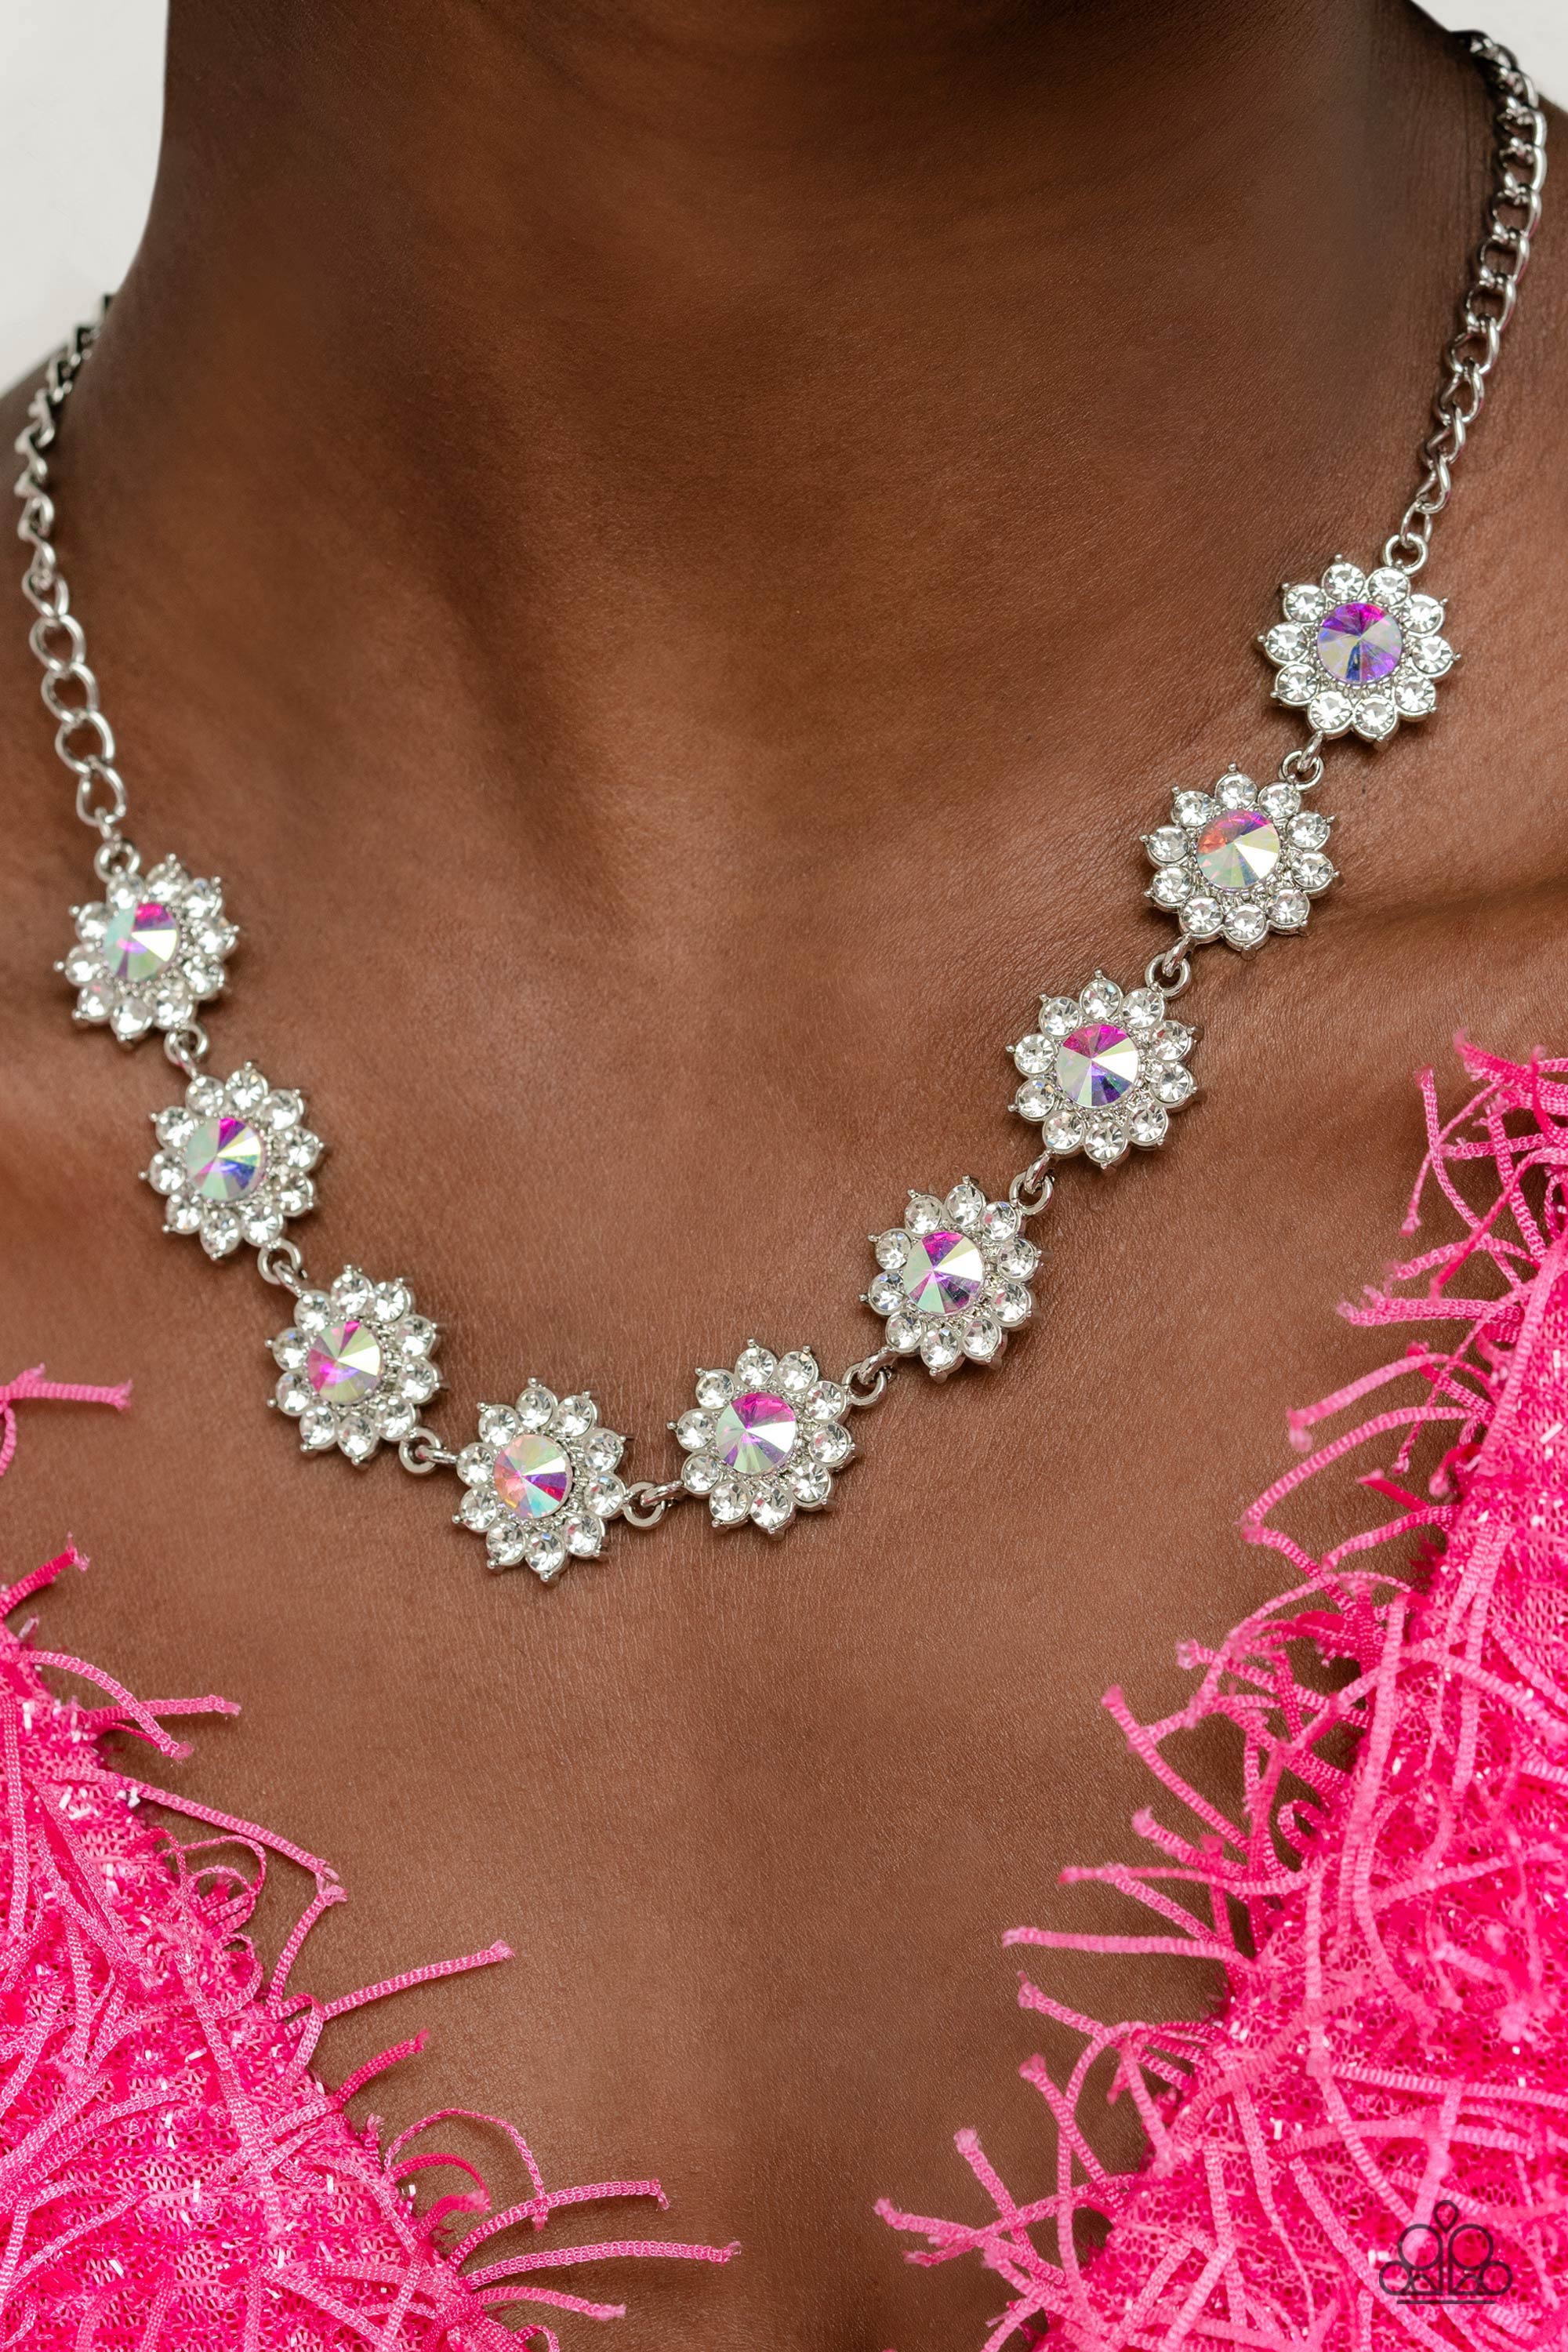 Shop Louis Vuitton 2019-20FW Blooming Strass Necklace (M68374) by